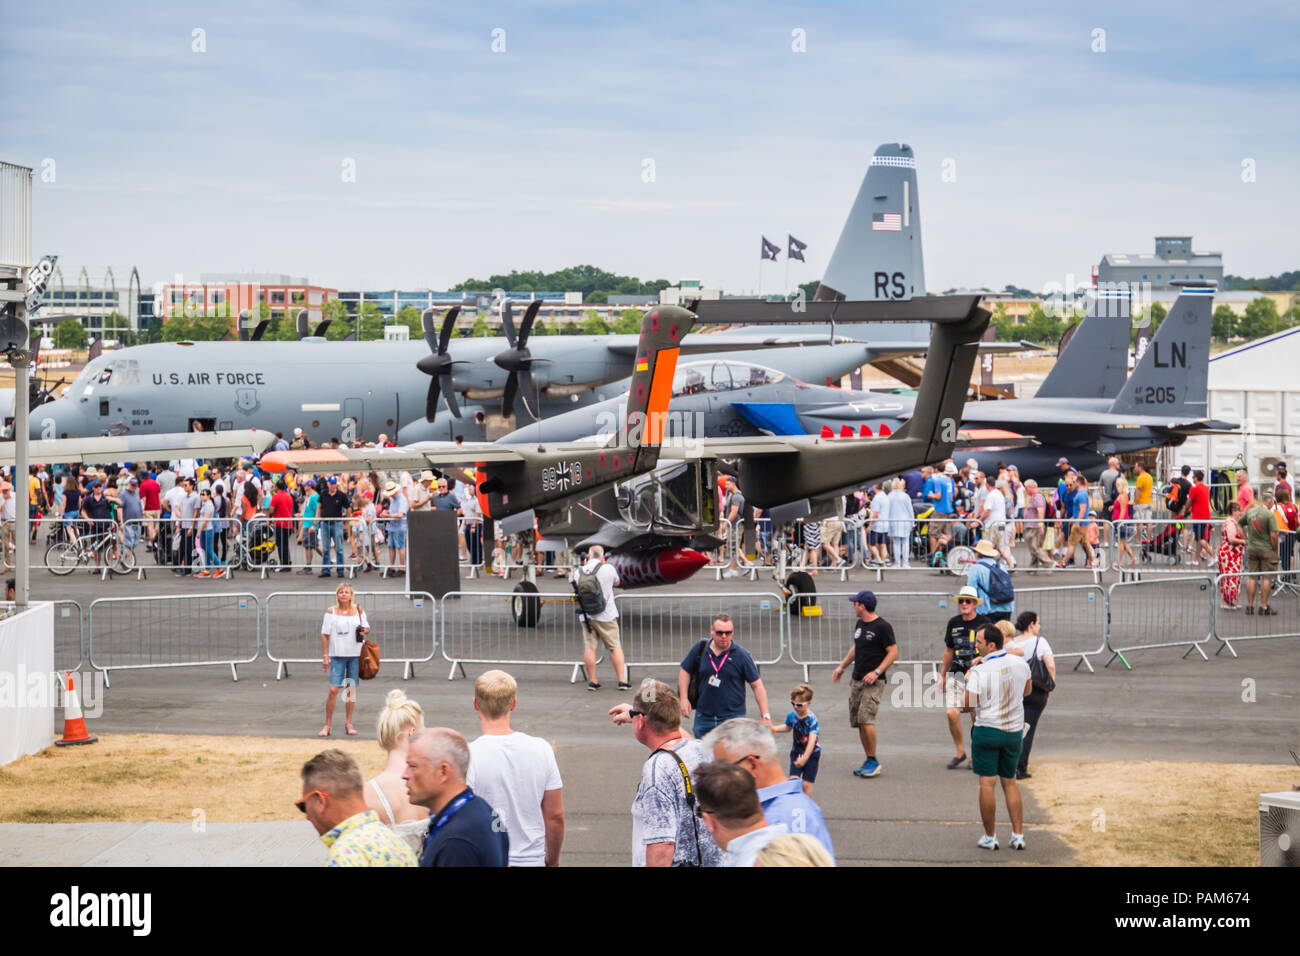 Visitors looking at C-130 Hercules and other air force plane in Farnborough Airshow 2018 in Farnborough, hampshire, United kingdom. Stock Photo